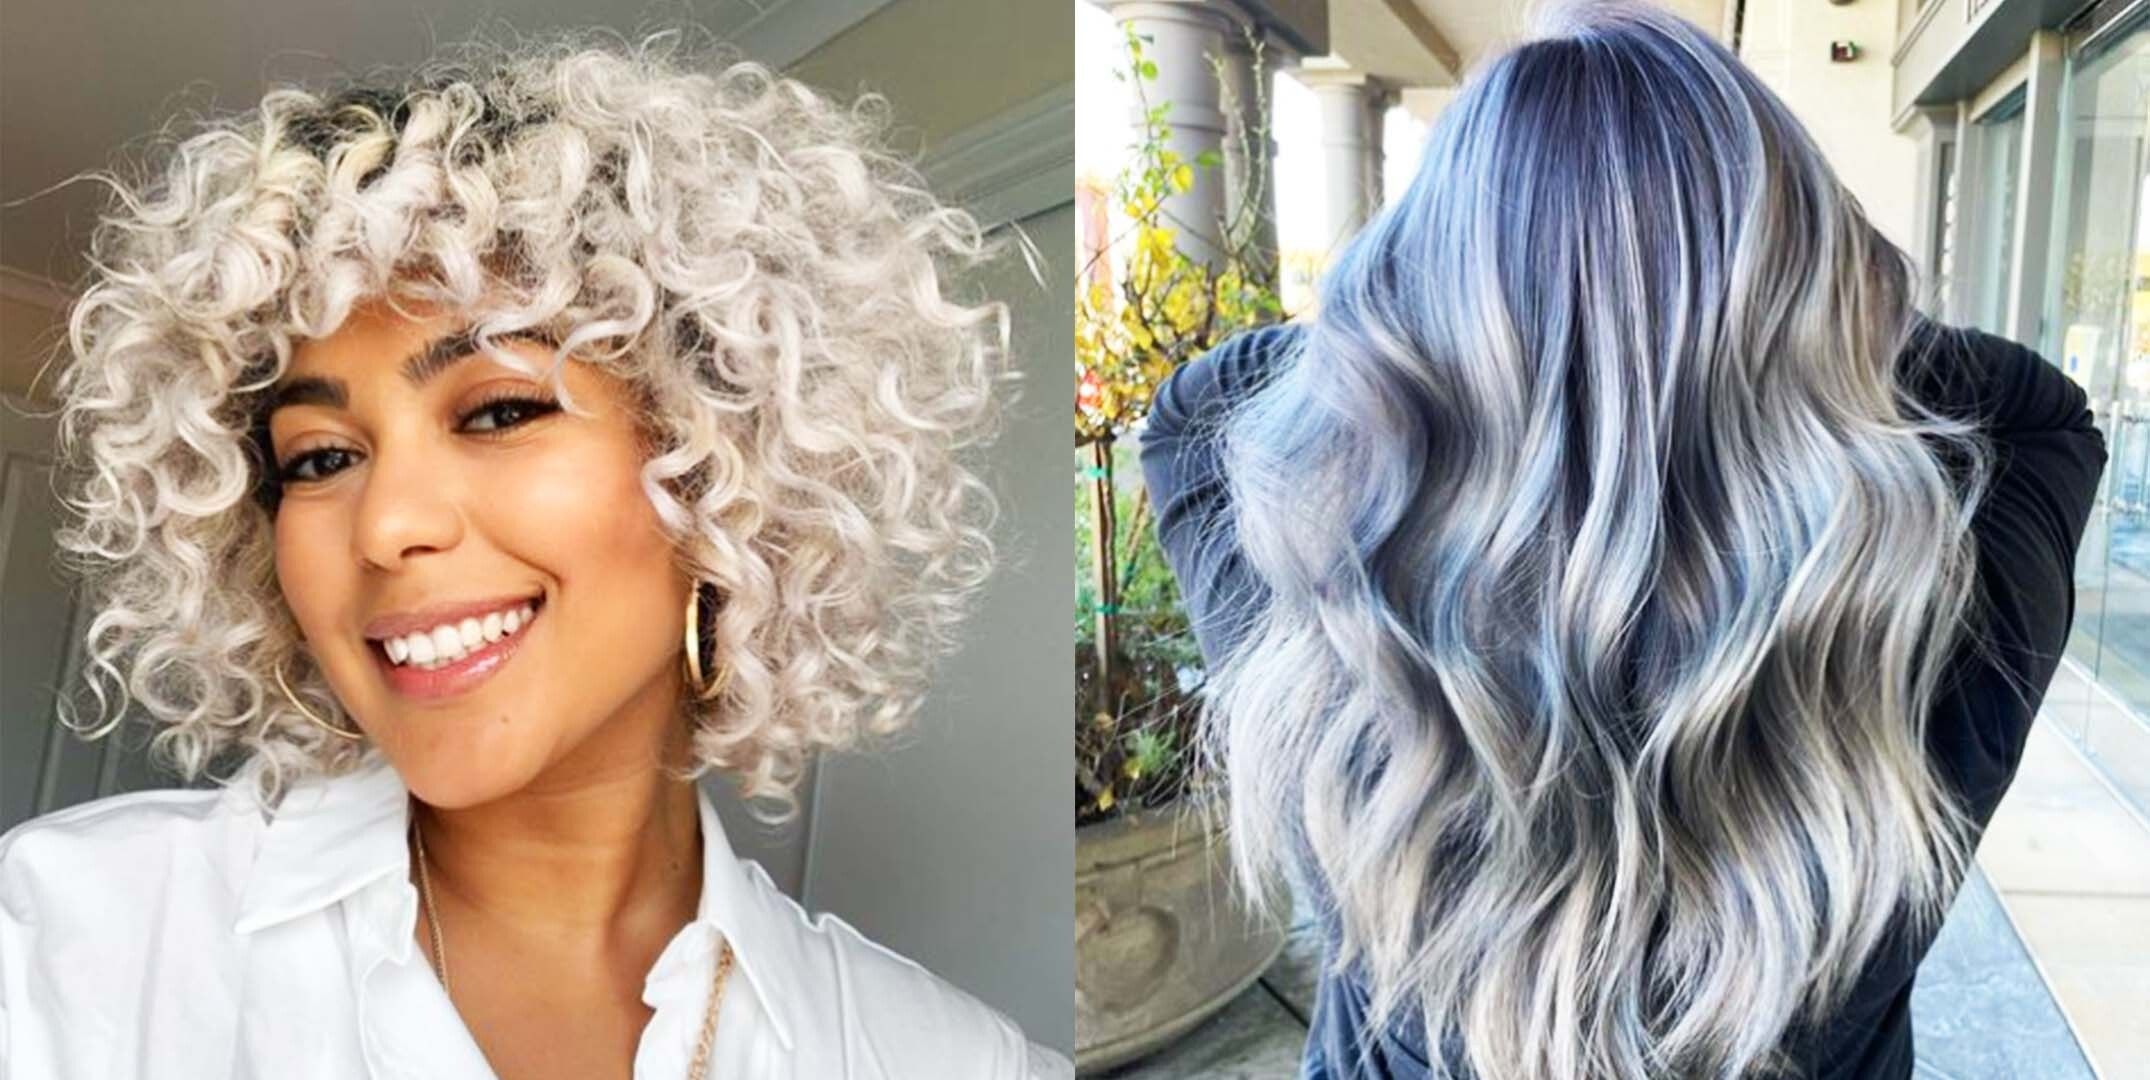 4. "Blue Hair Color Ideas for Asian Girls" - wide 3